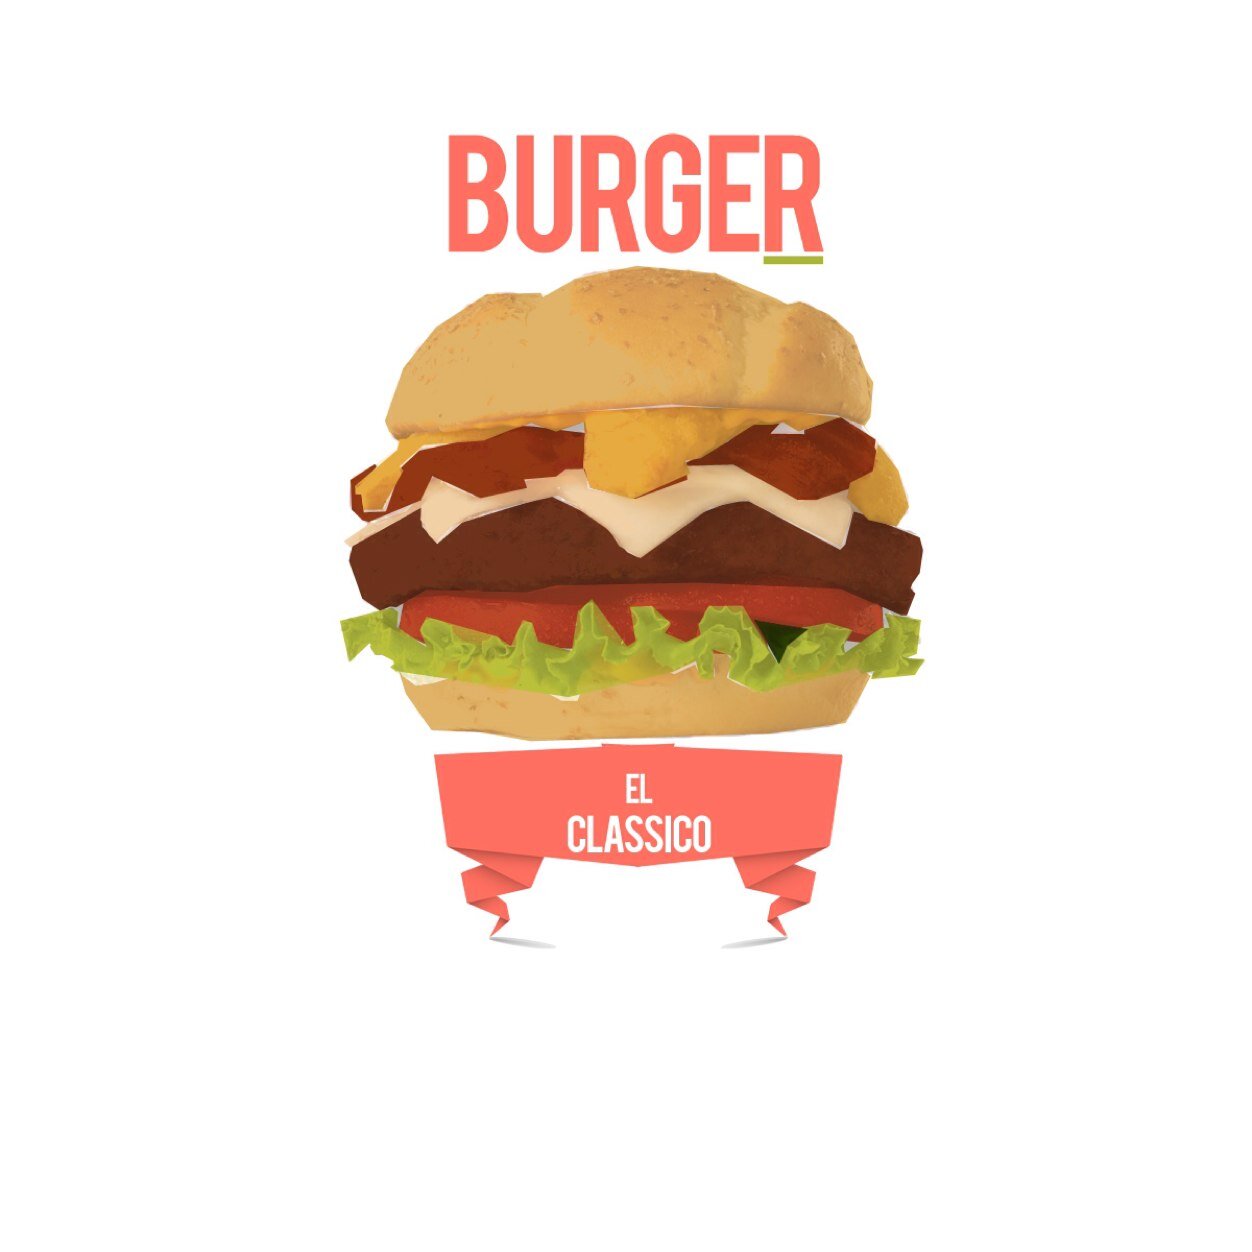 Burgers perfected. Conoil filling station on Oregun road opposite Kingsize Ikeja.Delivery/enquiries -09096563998,09096563997.  http://t.co/YGPB9MRNuS